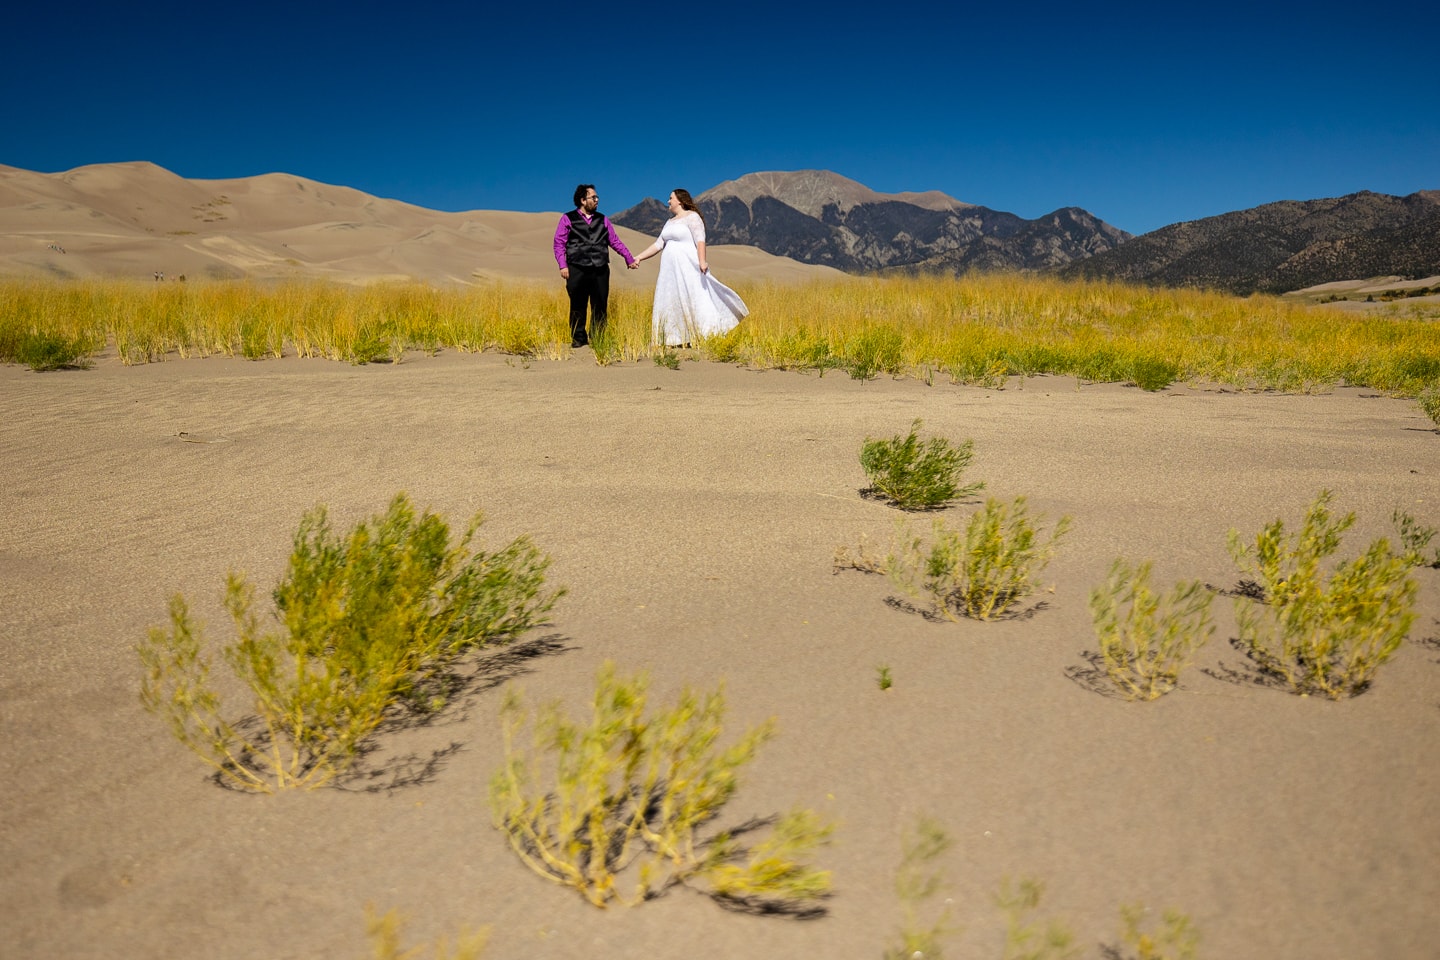 A wedding photo at great sand dunes national park in October.